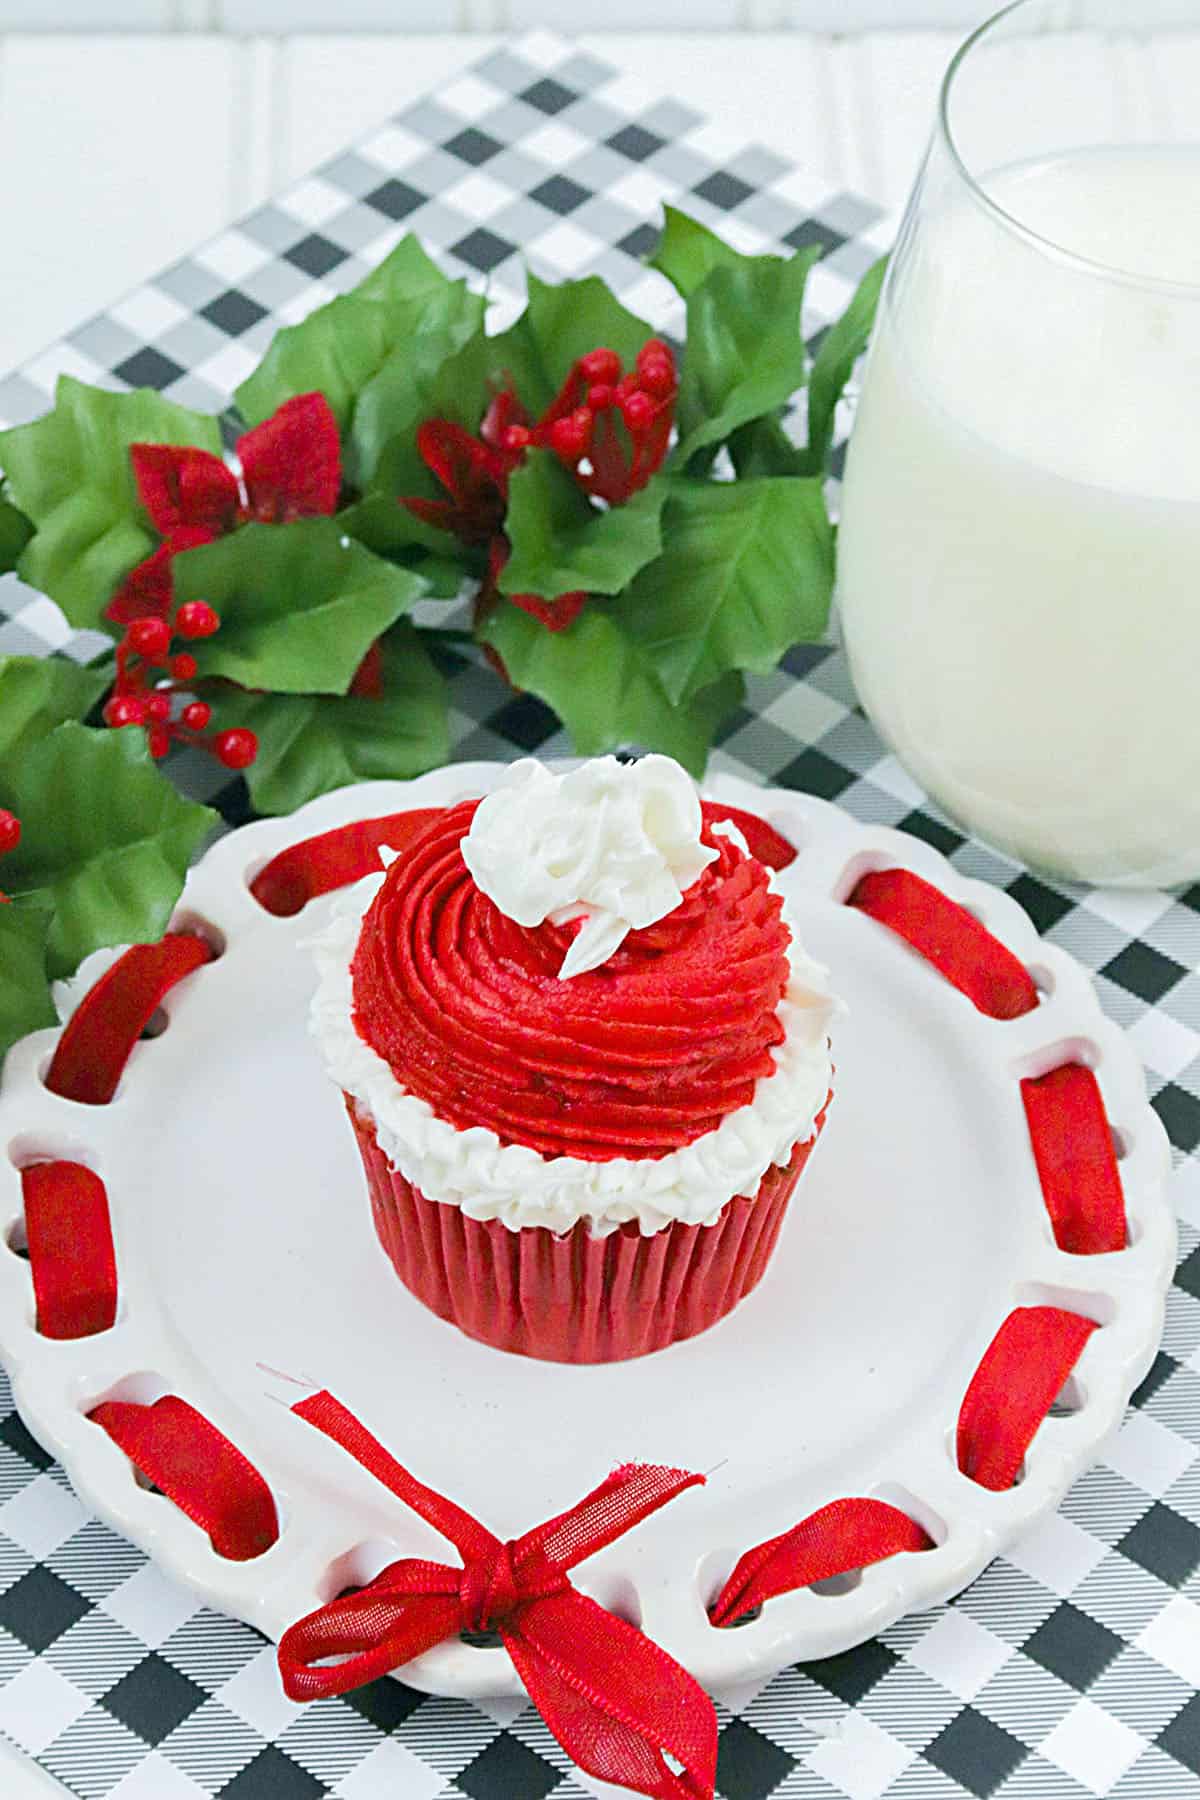 A santa's hat cupcake sitting on a white plate with red ribbon. There is holly and a glass of milk in the background.